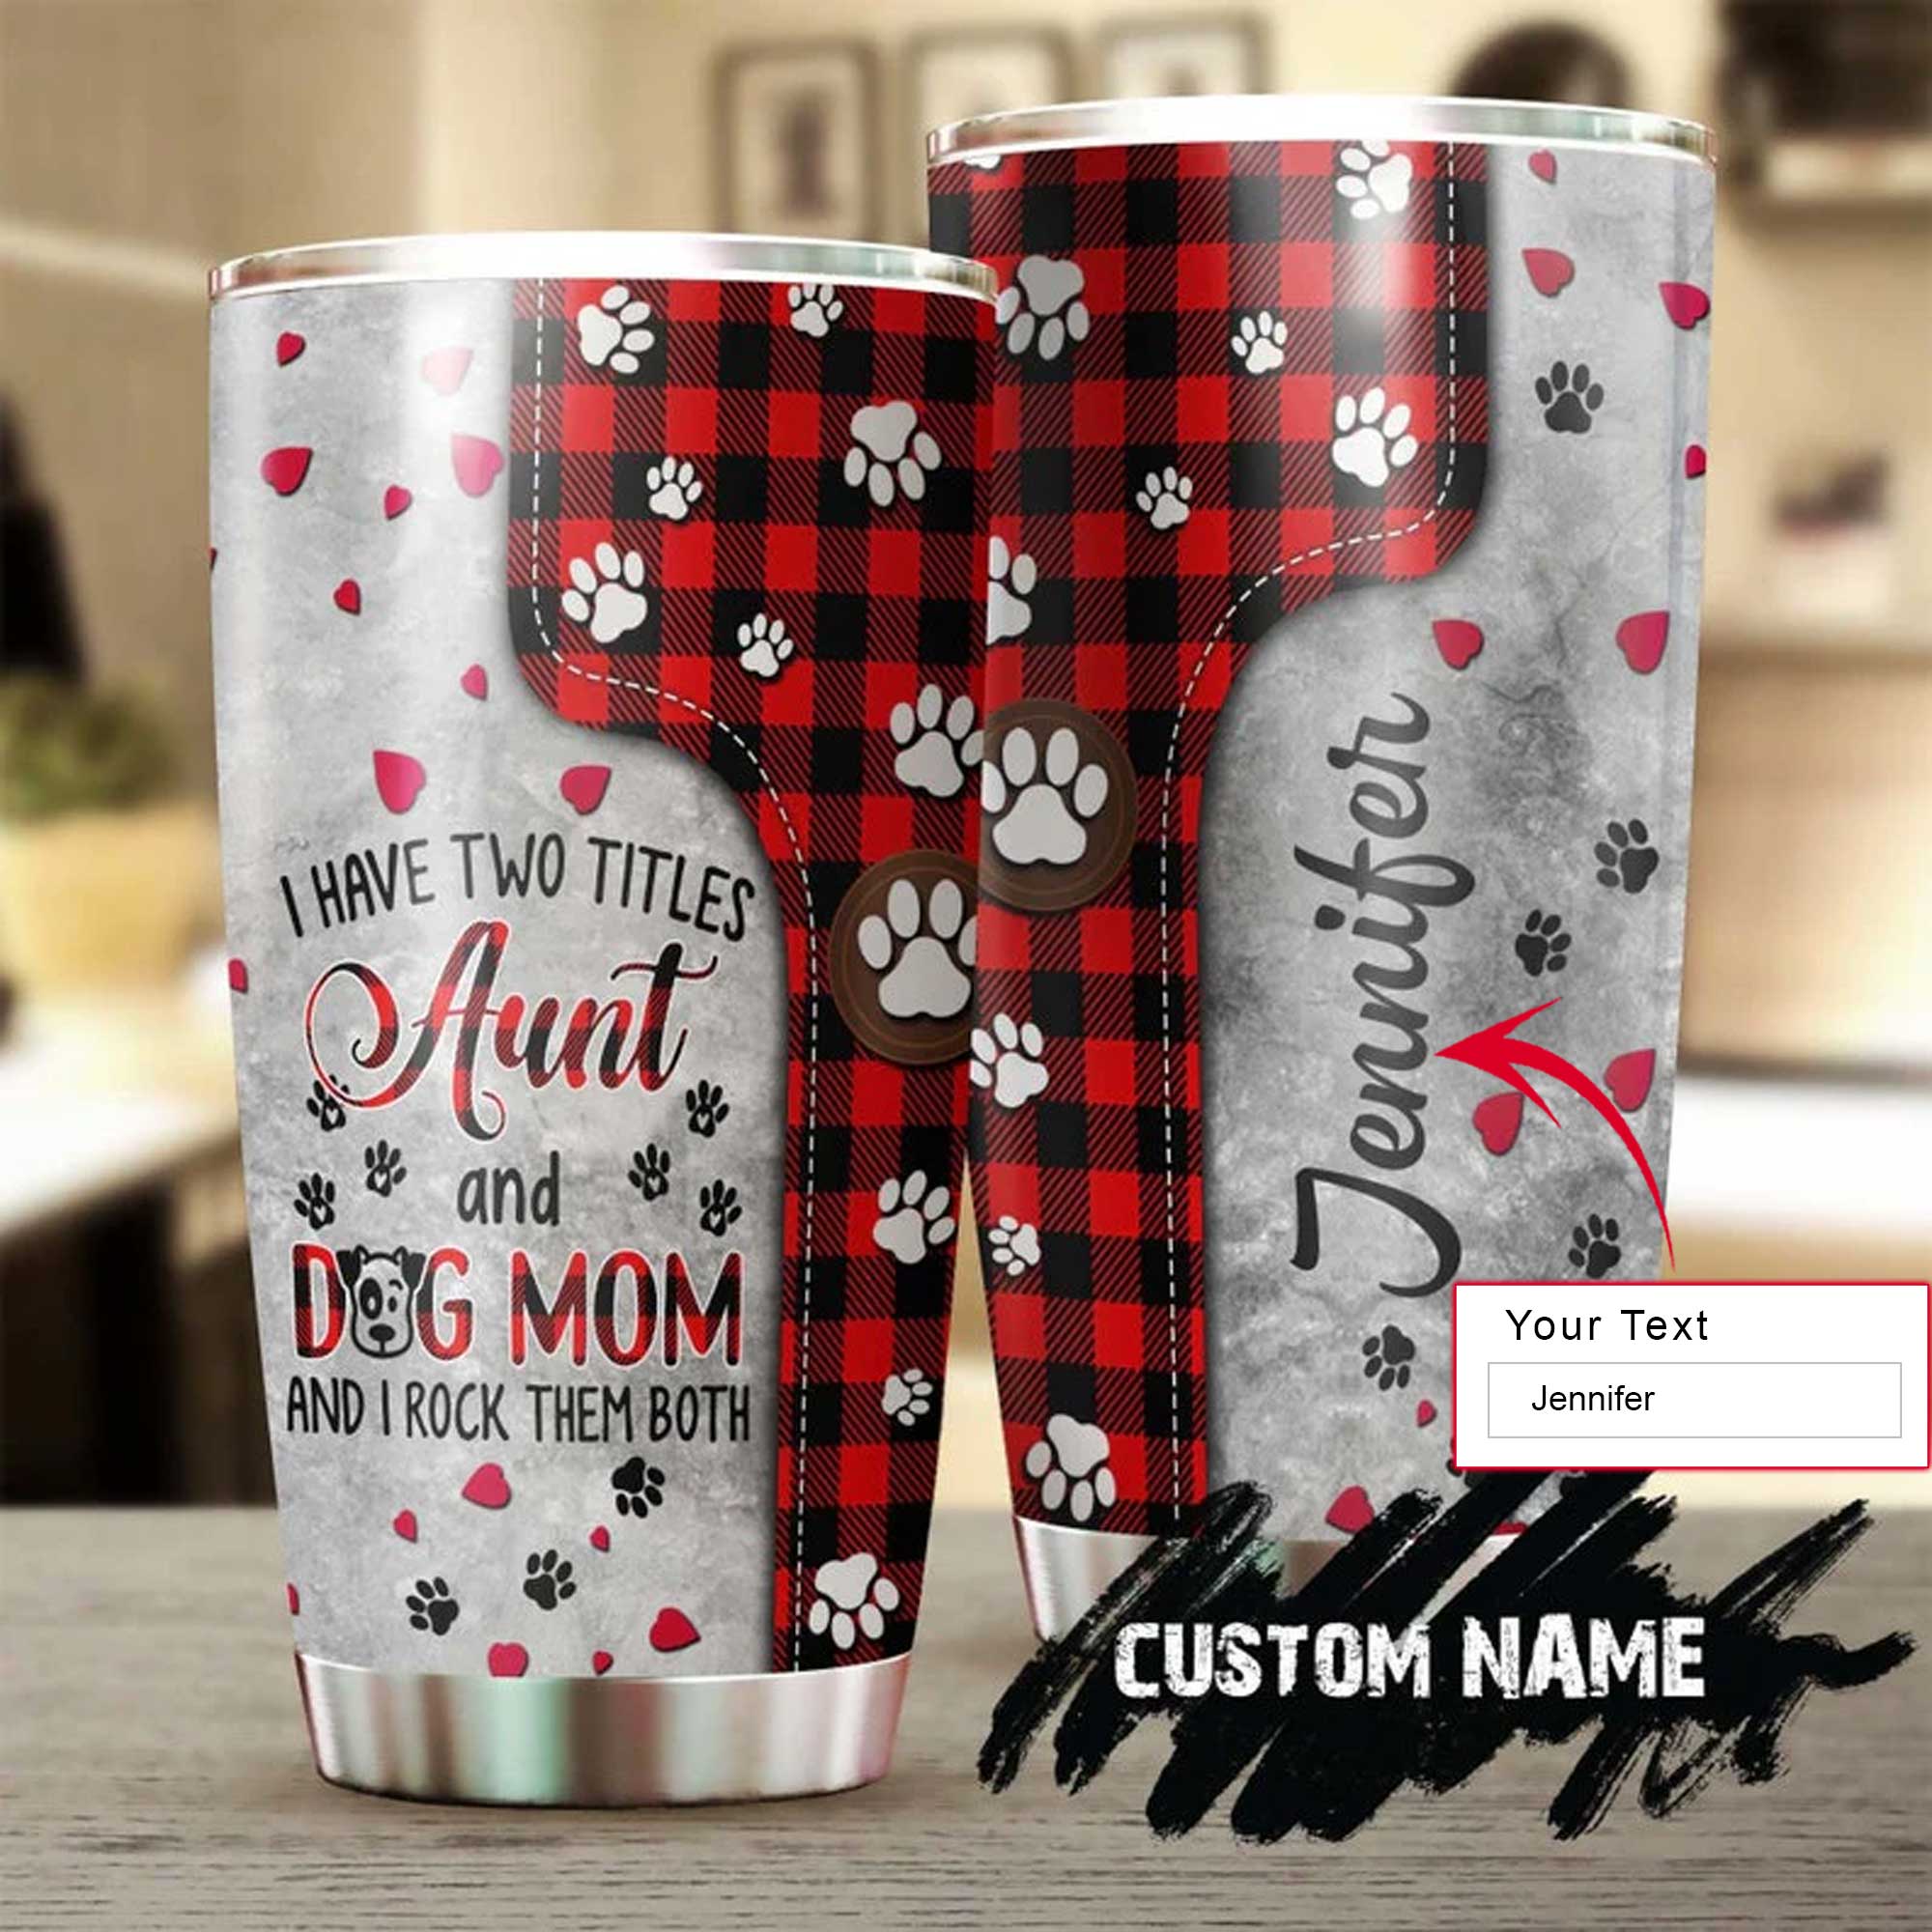 Personalized Mother's Day Gift Tumbler - Custom Gift For Mother's Day, Presents For Mom, Dog Lover - I Have Two Titles Aunt And Dog Mom Tumbler